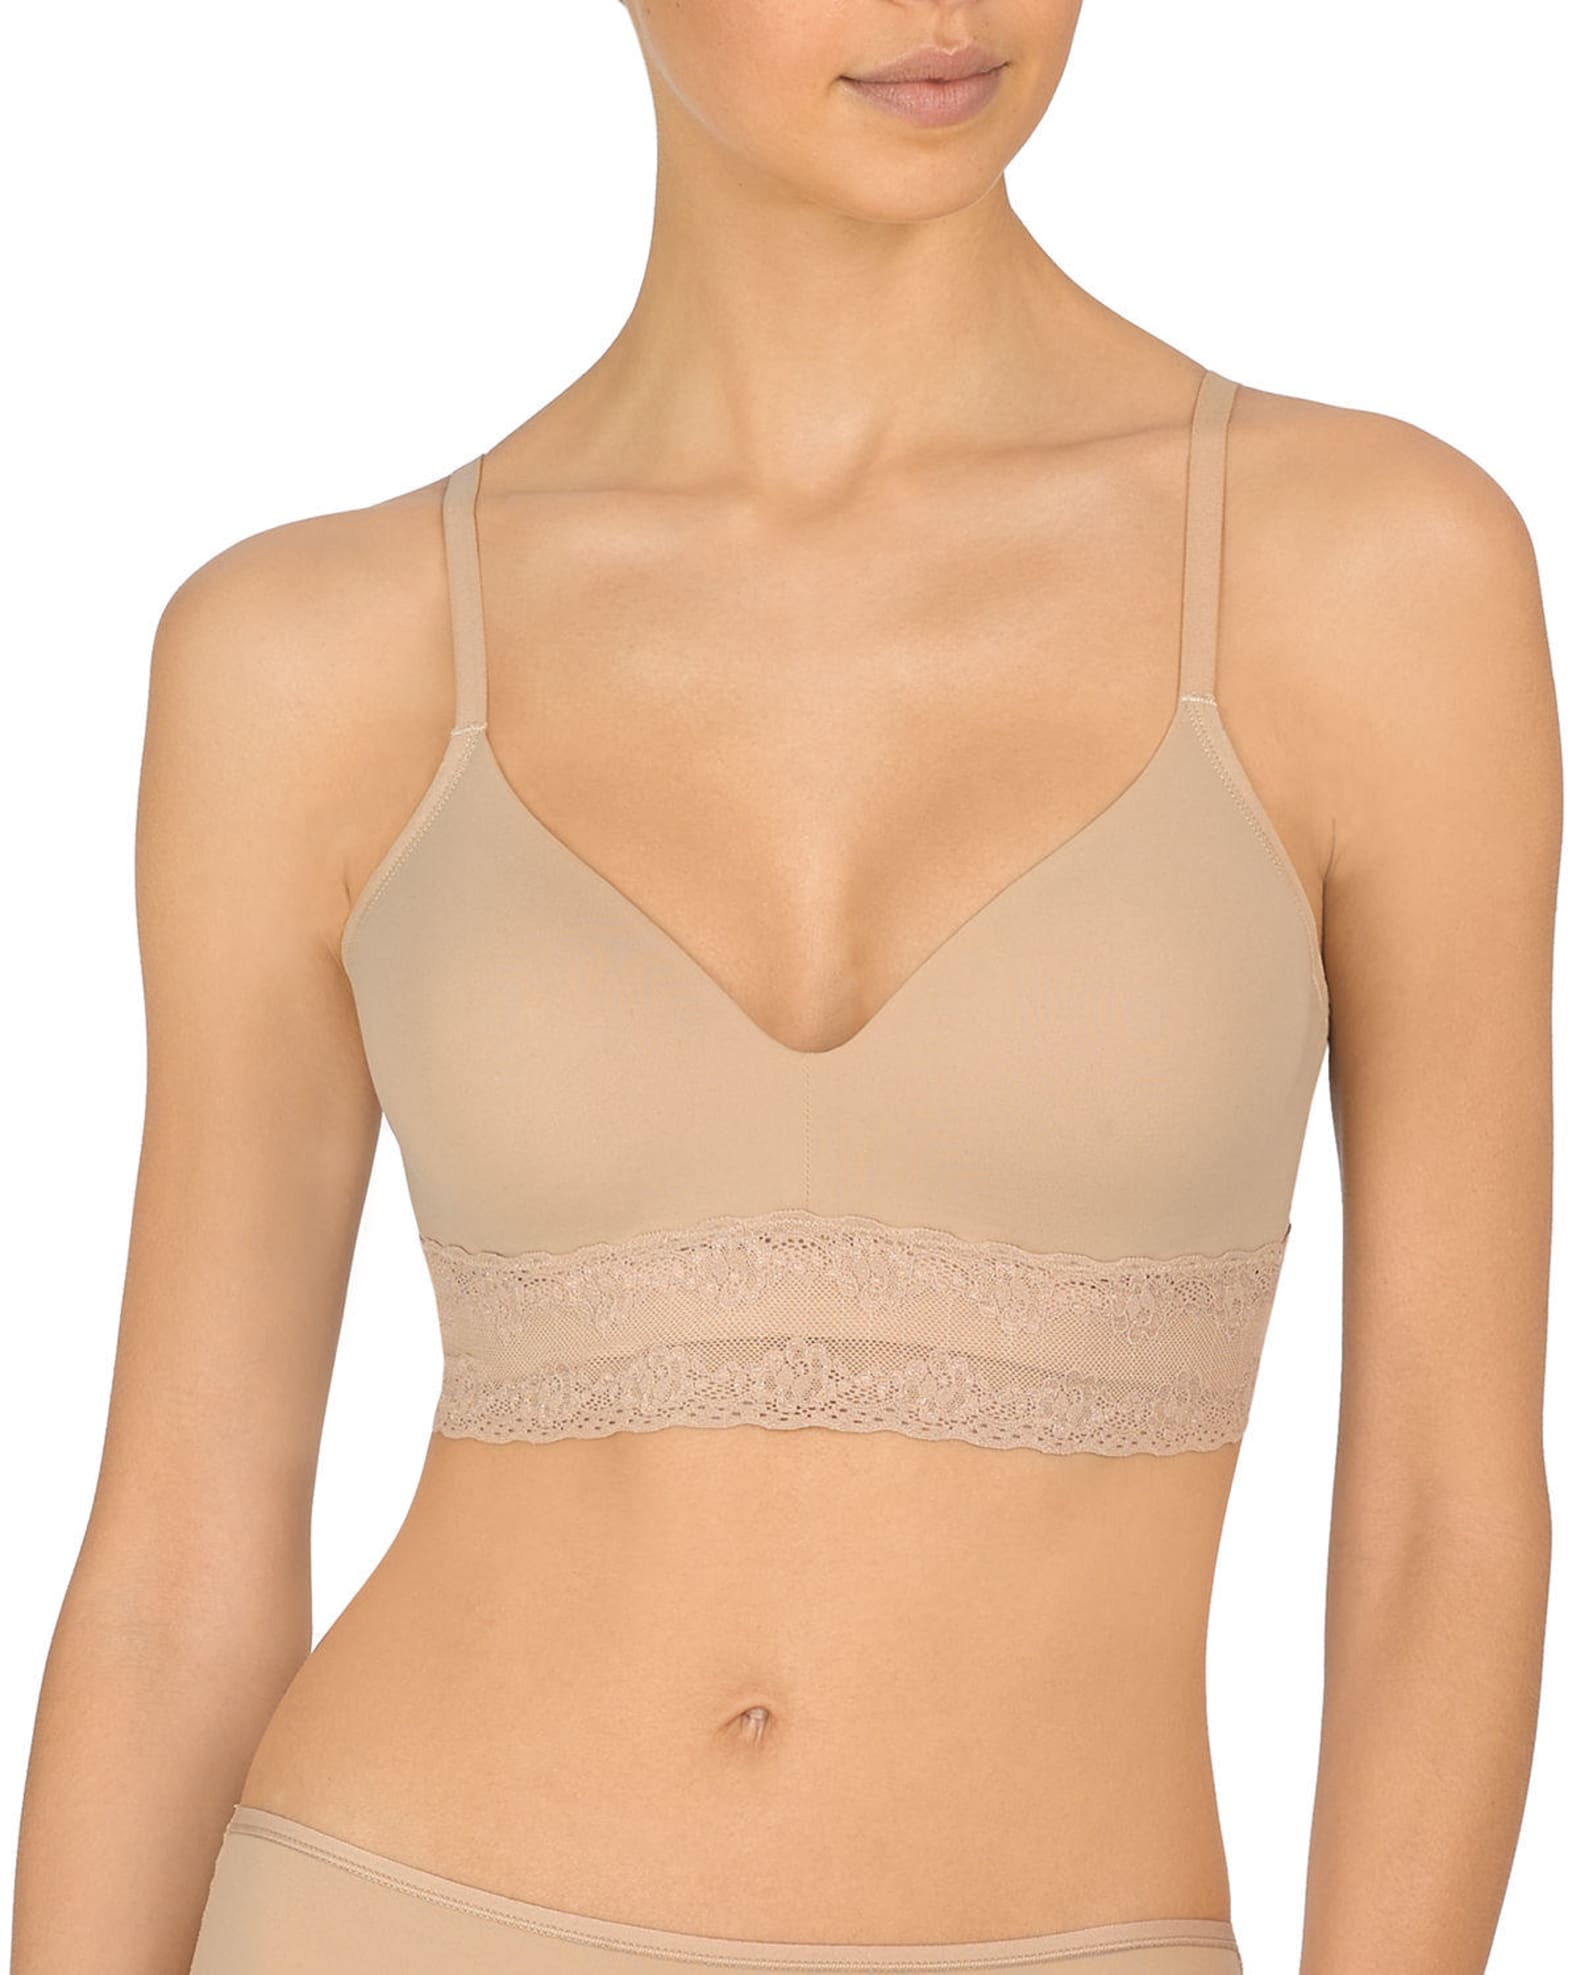 WMNS Embroidered Rose Adorned Cloth Cup Bra - Contoured Straps